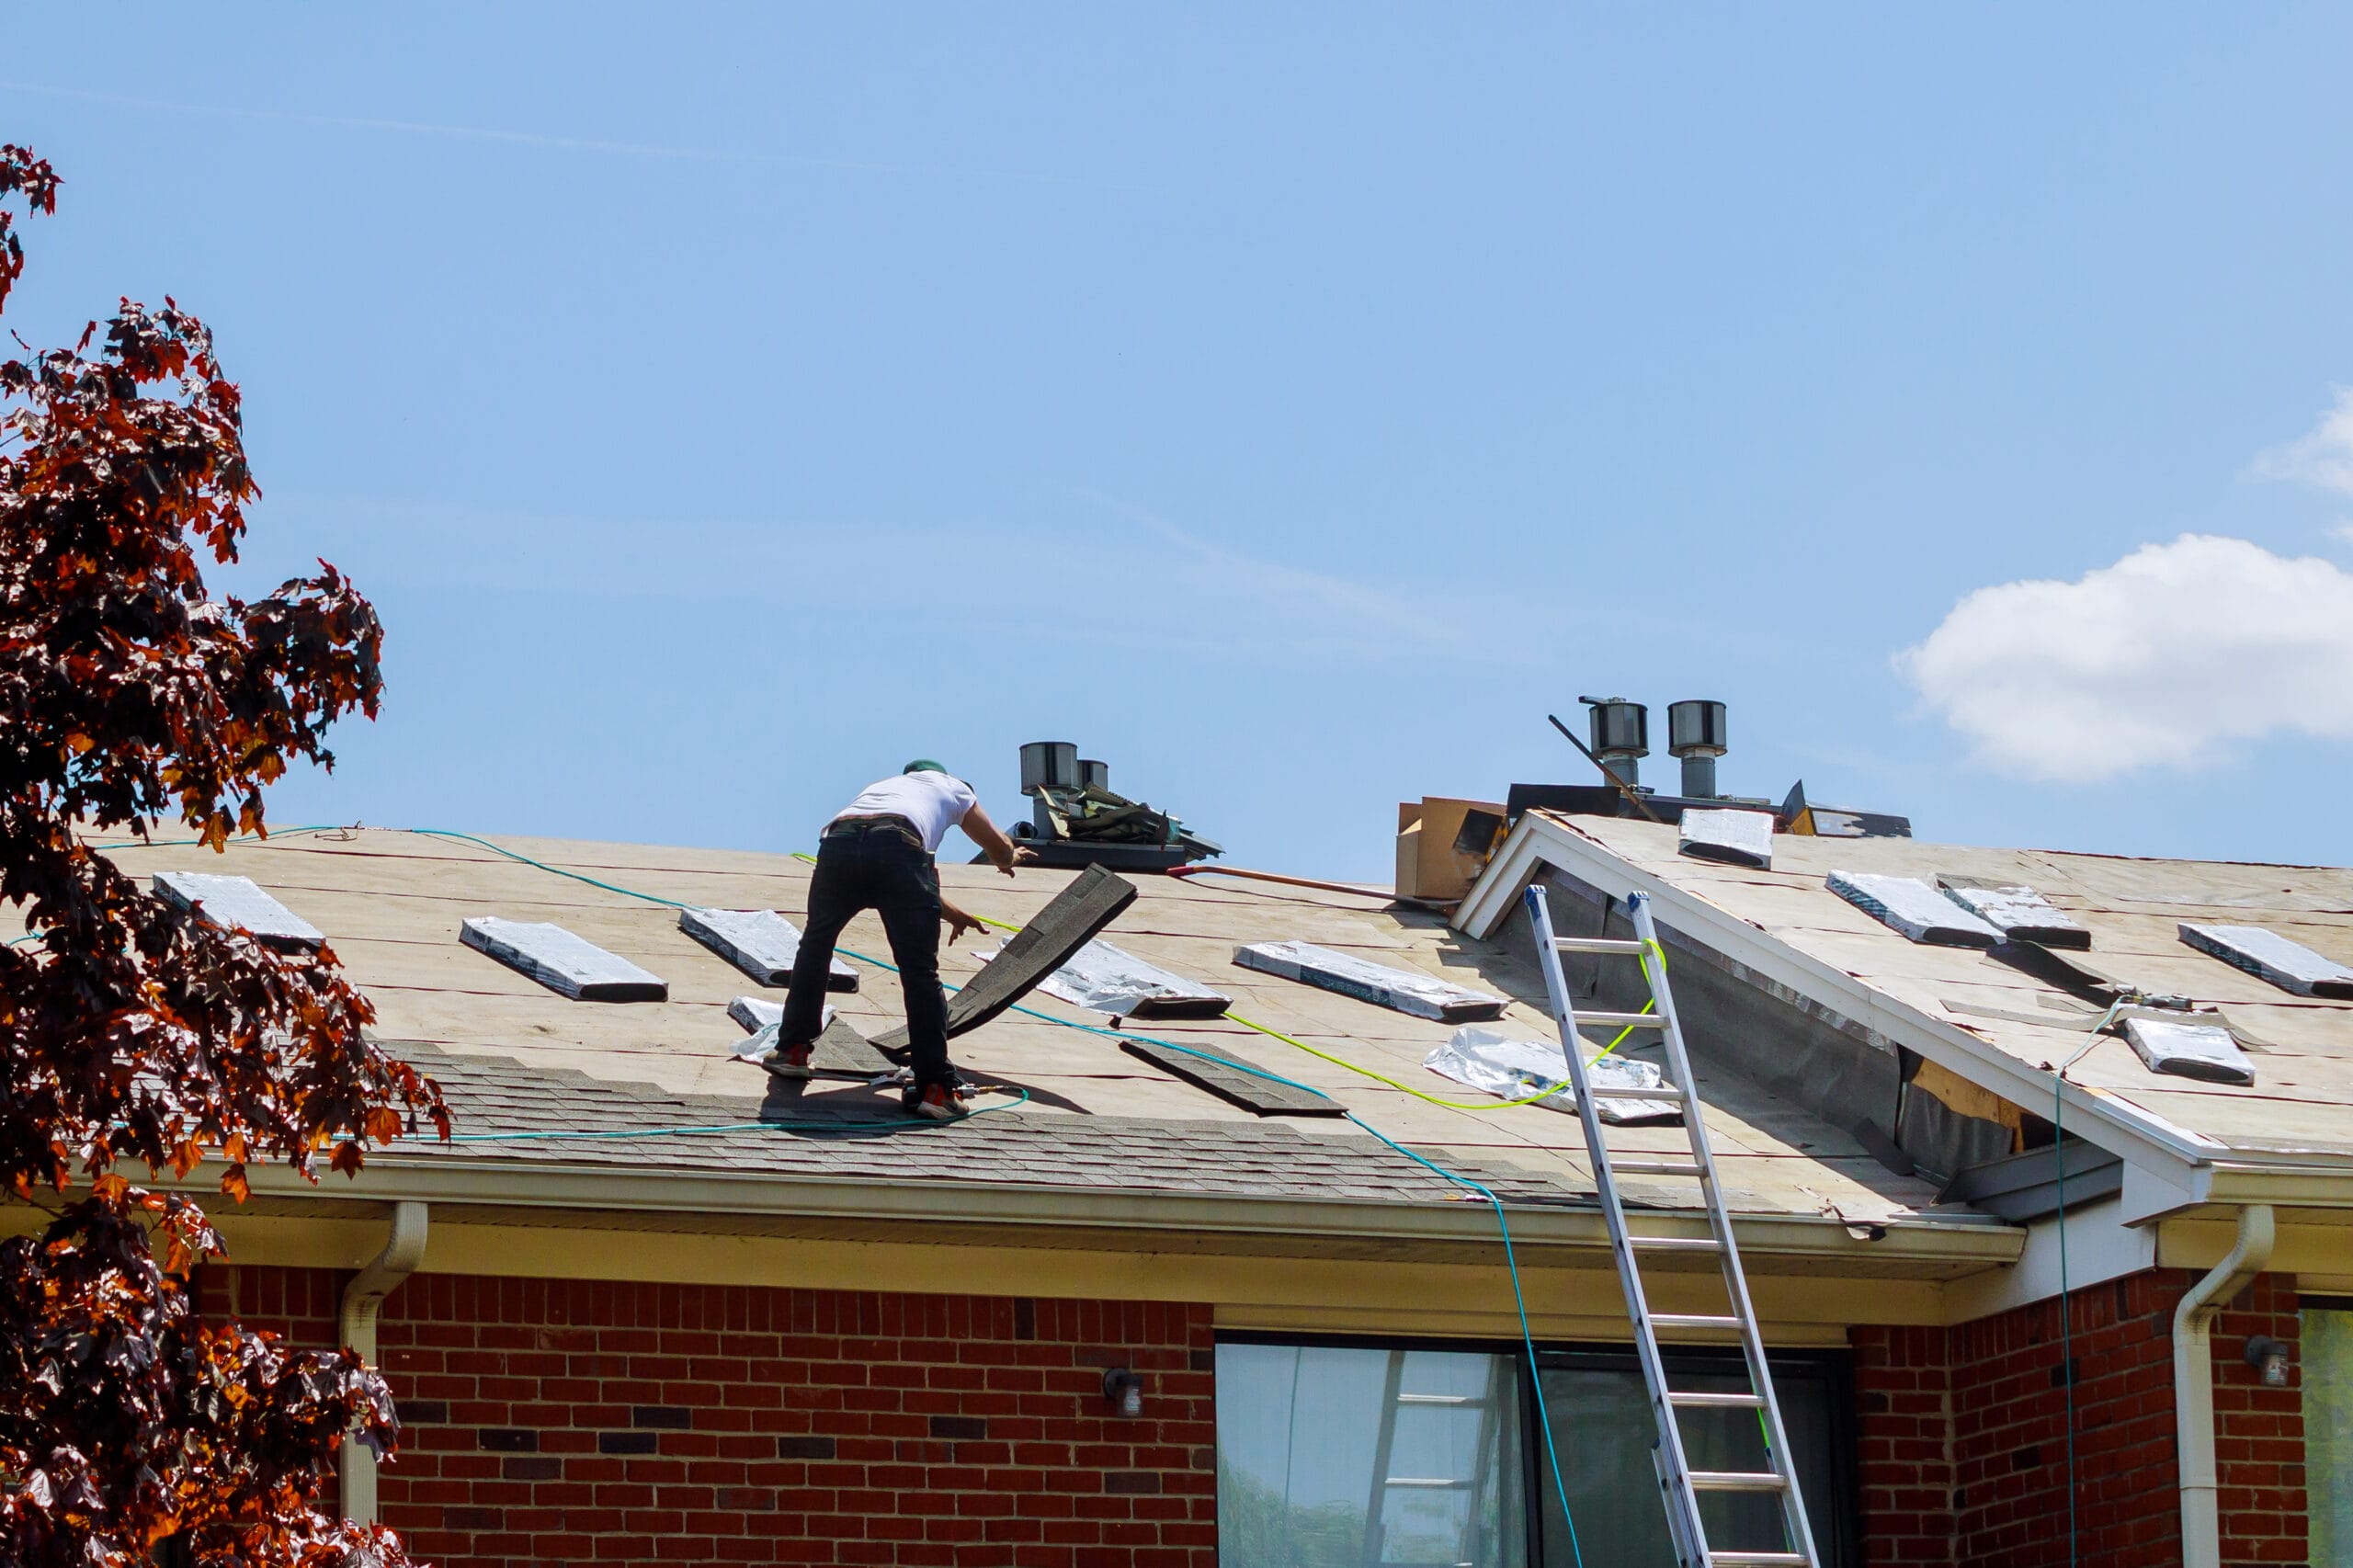 local roofer, local roofing company, local roofing service